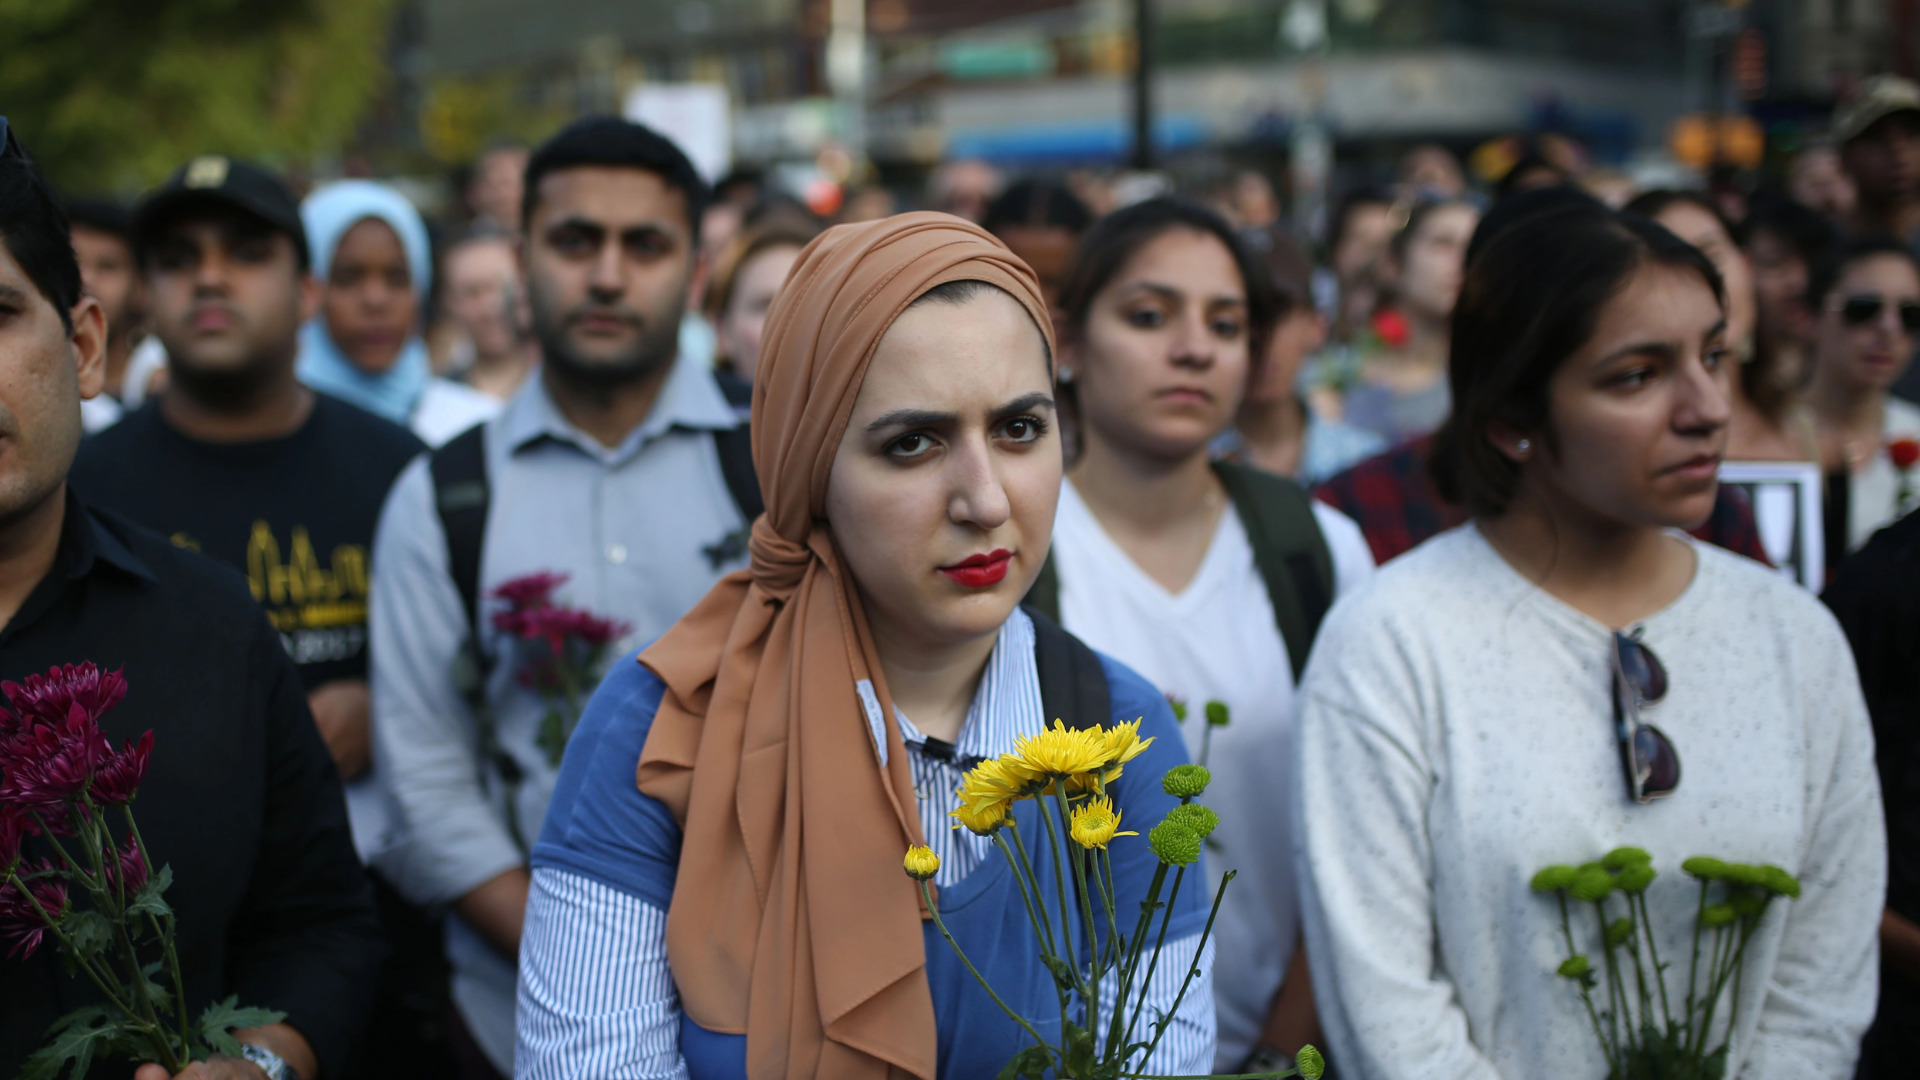 Recent survey results reveal a disturbing truth on Islamophobia in Canada